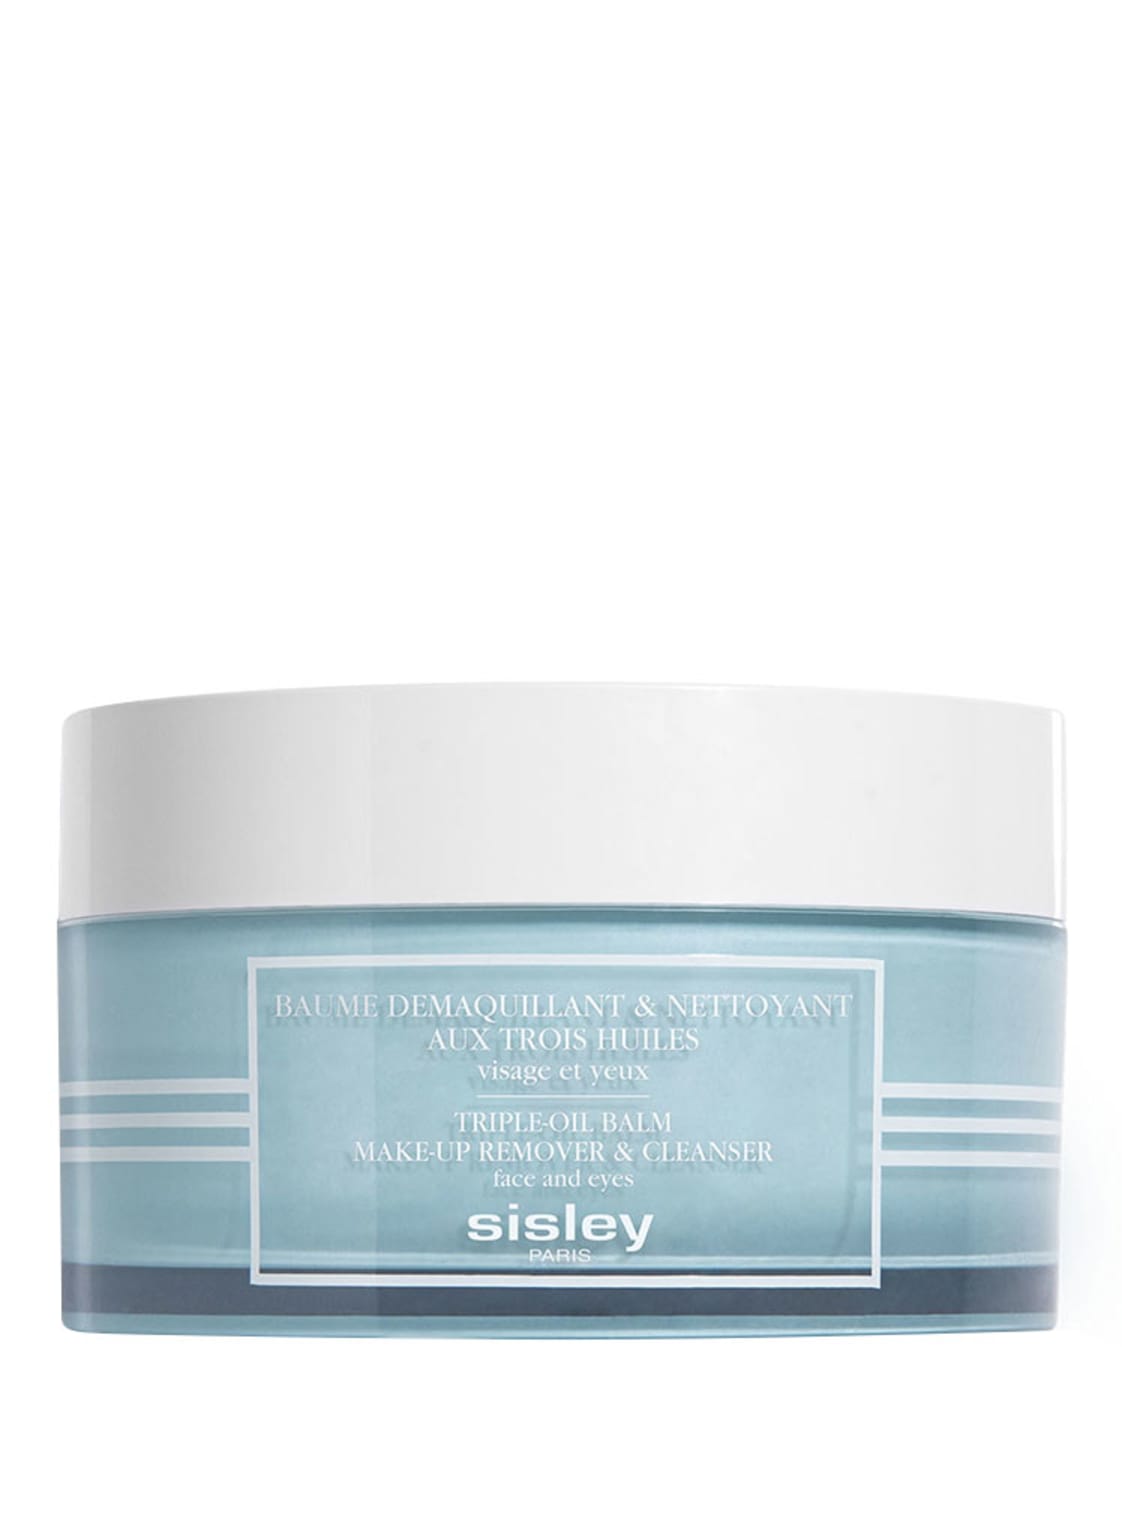 Image of Sisley Paris Baume Demaquillant & Nettoyant Triple-Oil Balm Make-up Remover & Cleanser 125 g